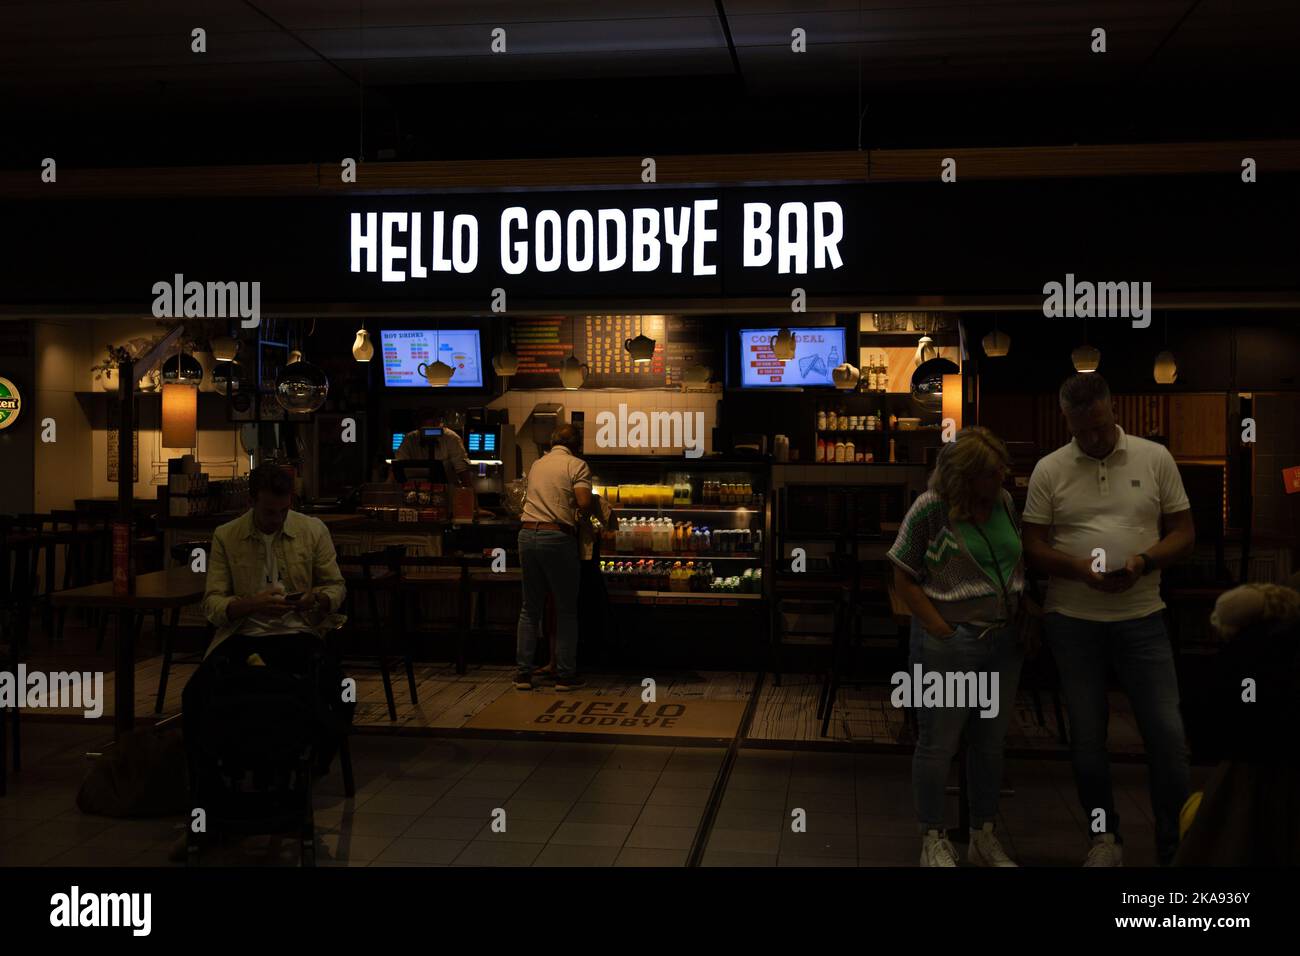 A group of people in the Hello Goodbye Bar in Amsterdam Airport Schiphol Stock Photo